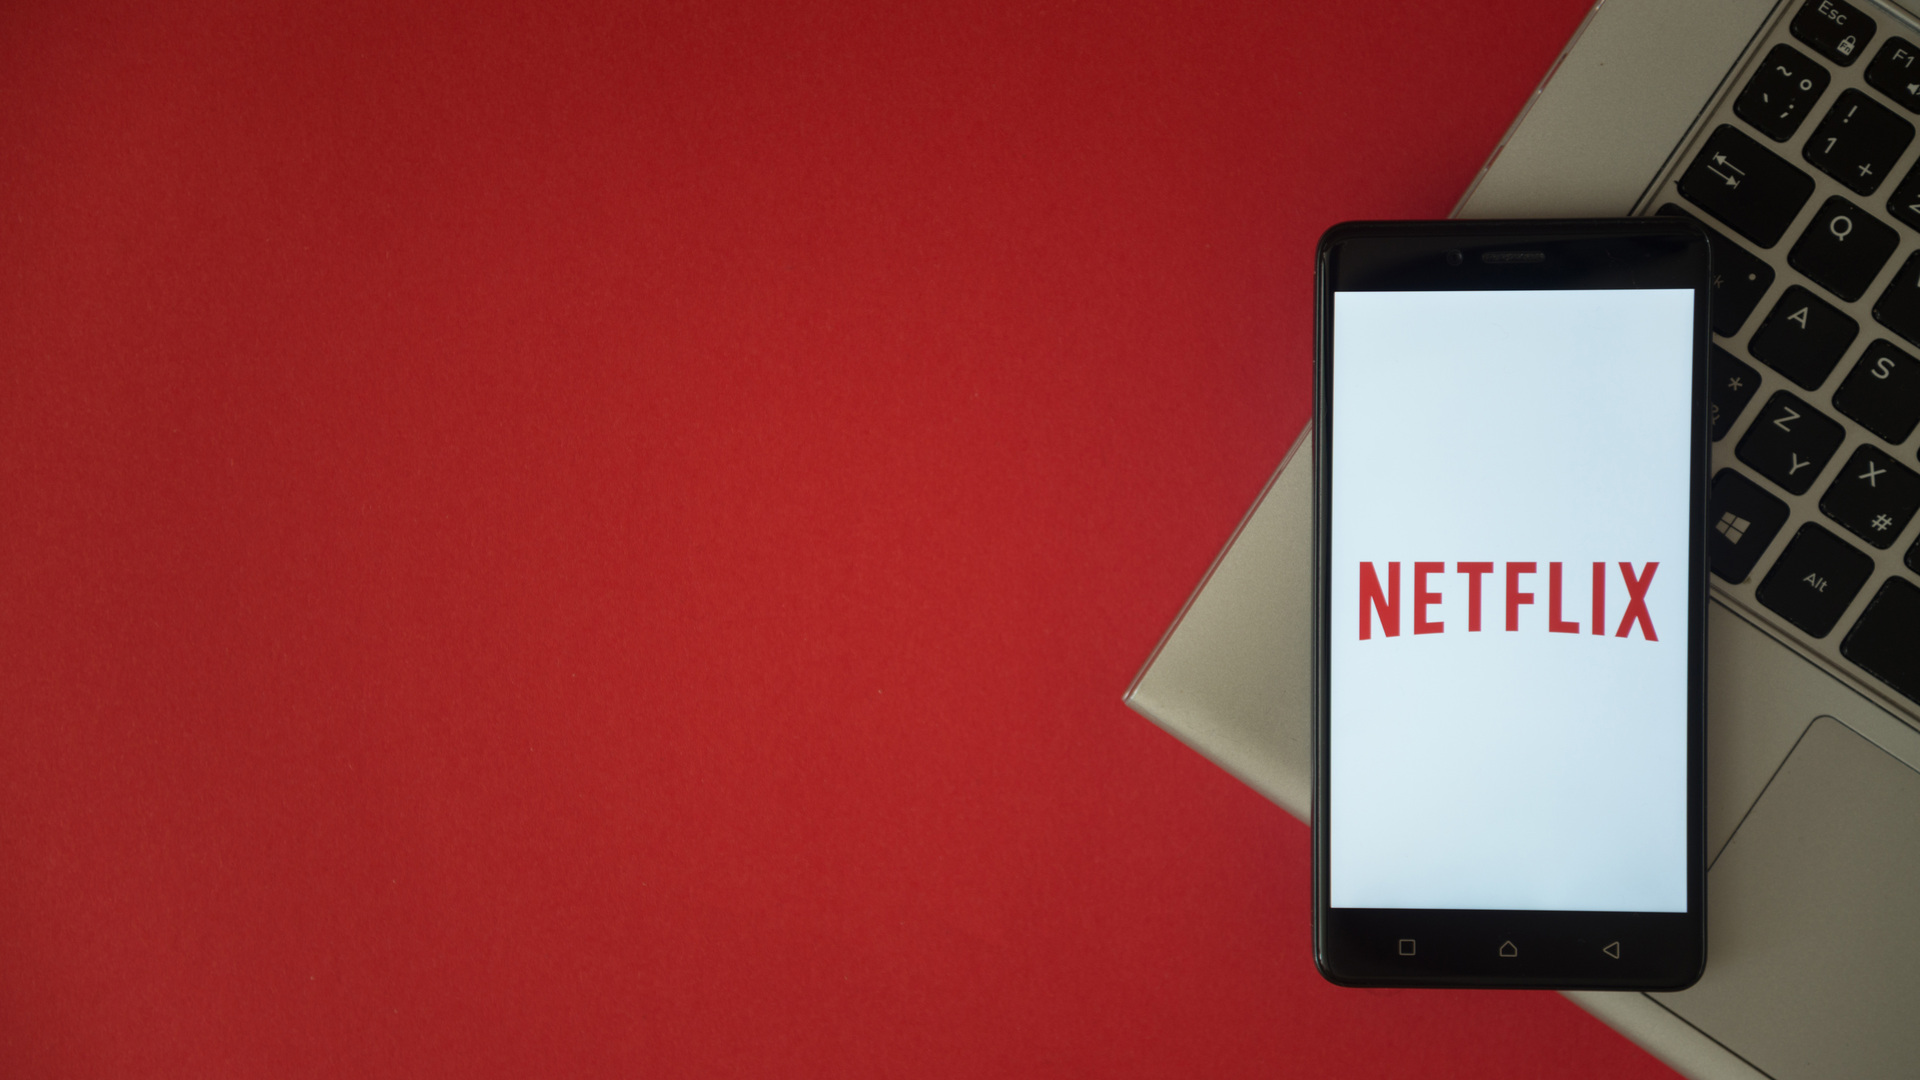 19x1080 Netflix Laptop Full Hd 1080p Hd 4k Wallpapers Images Backgrounds Photos And Pictures